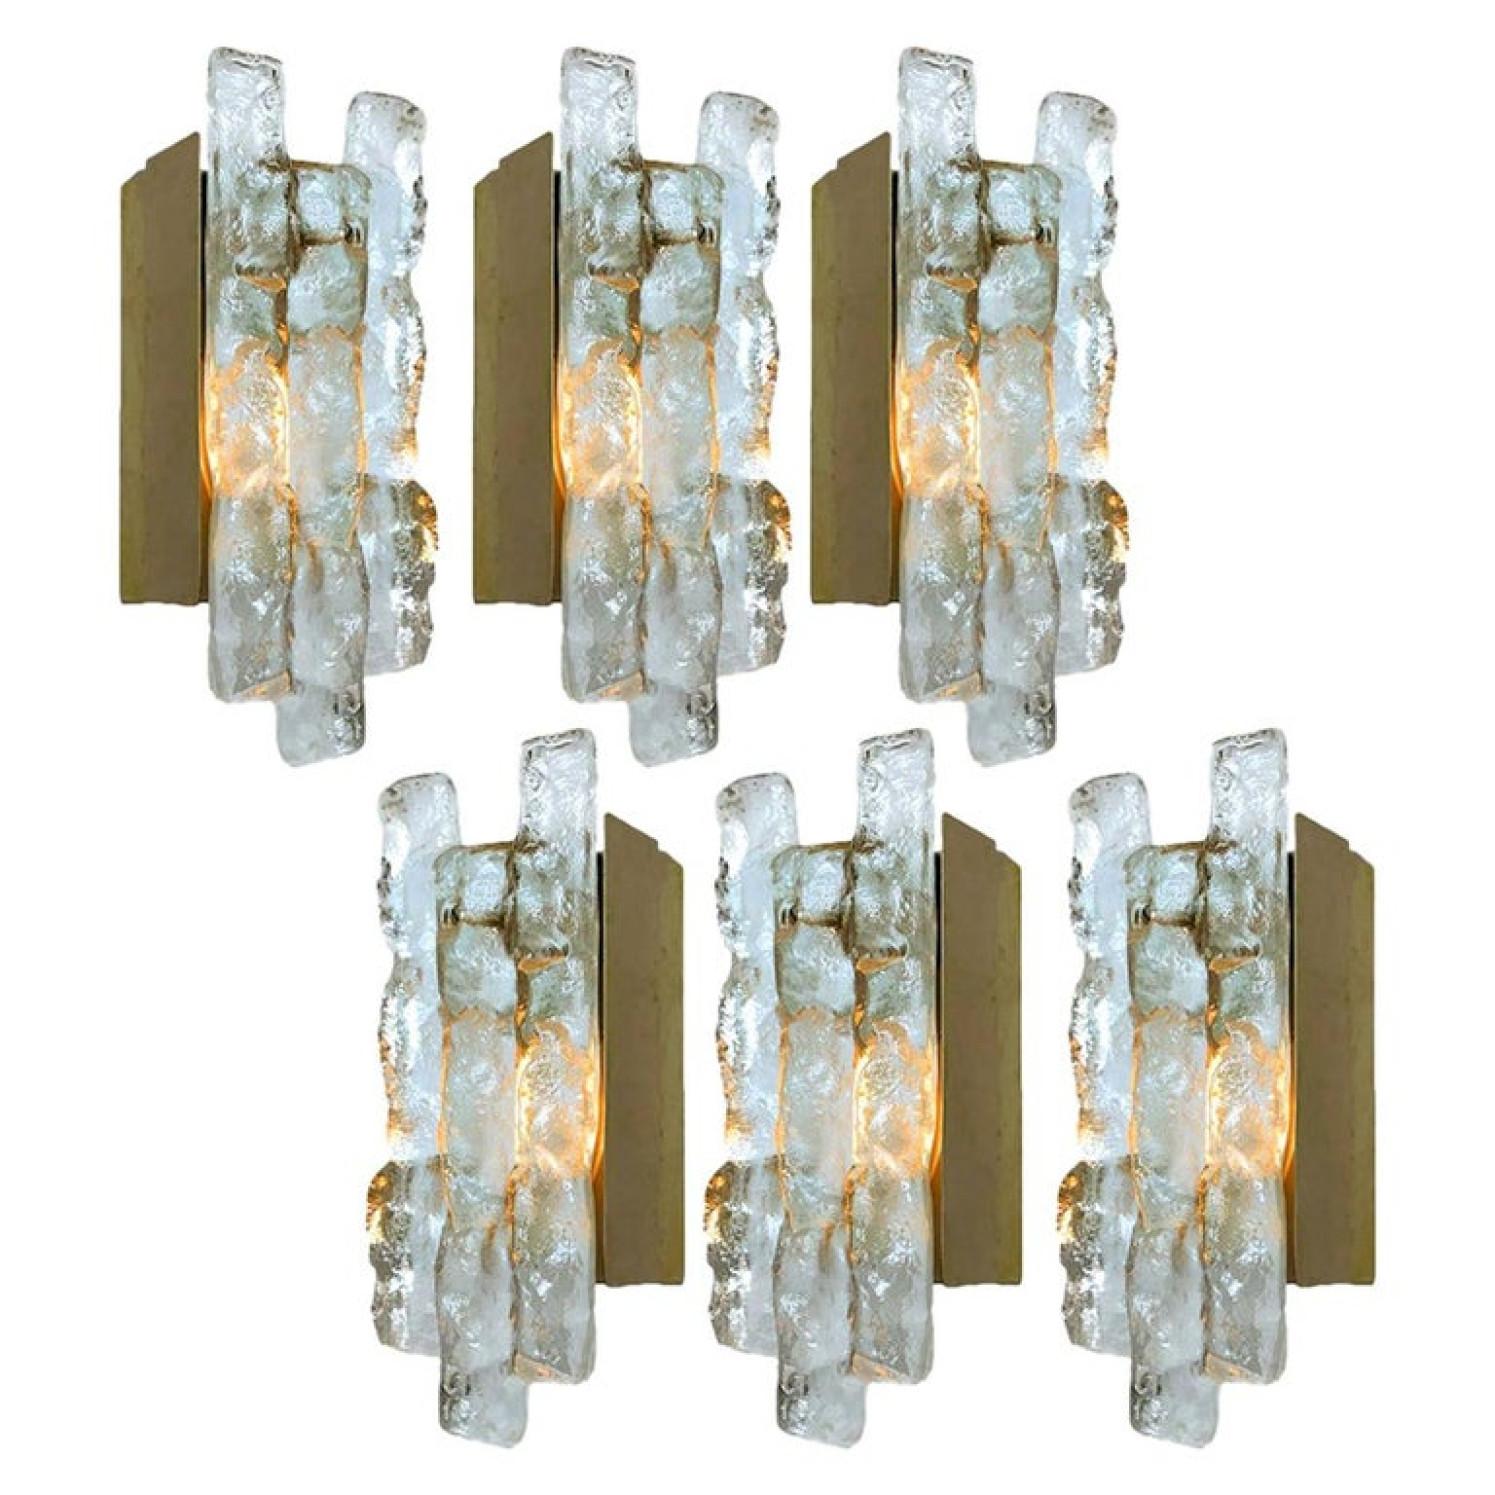 Set of beautiful and elegant modern brass wall lights/sconces, manufactured by J.T. Kalmar Austria in the 1970s. Lovely design, executed to a very high standard. Each wall light has one solid ice glass sheets dangling on it. Clean lines to